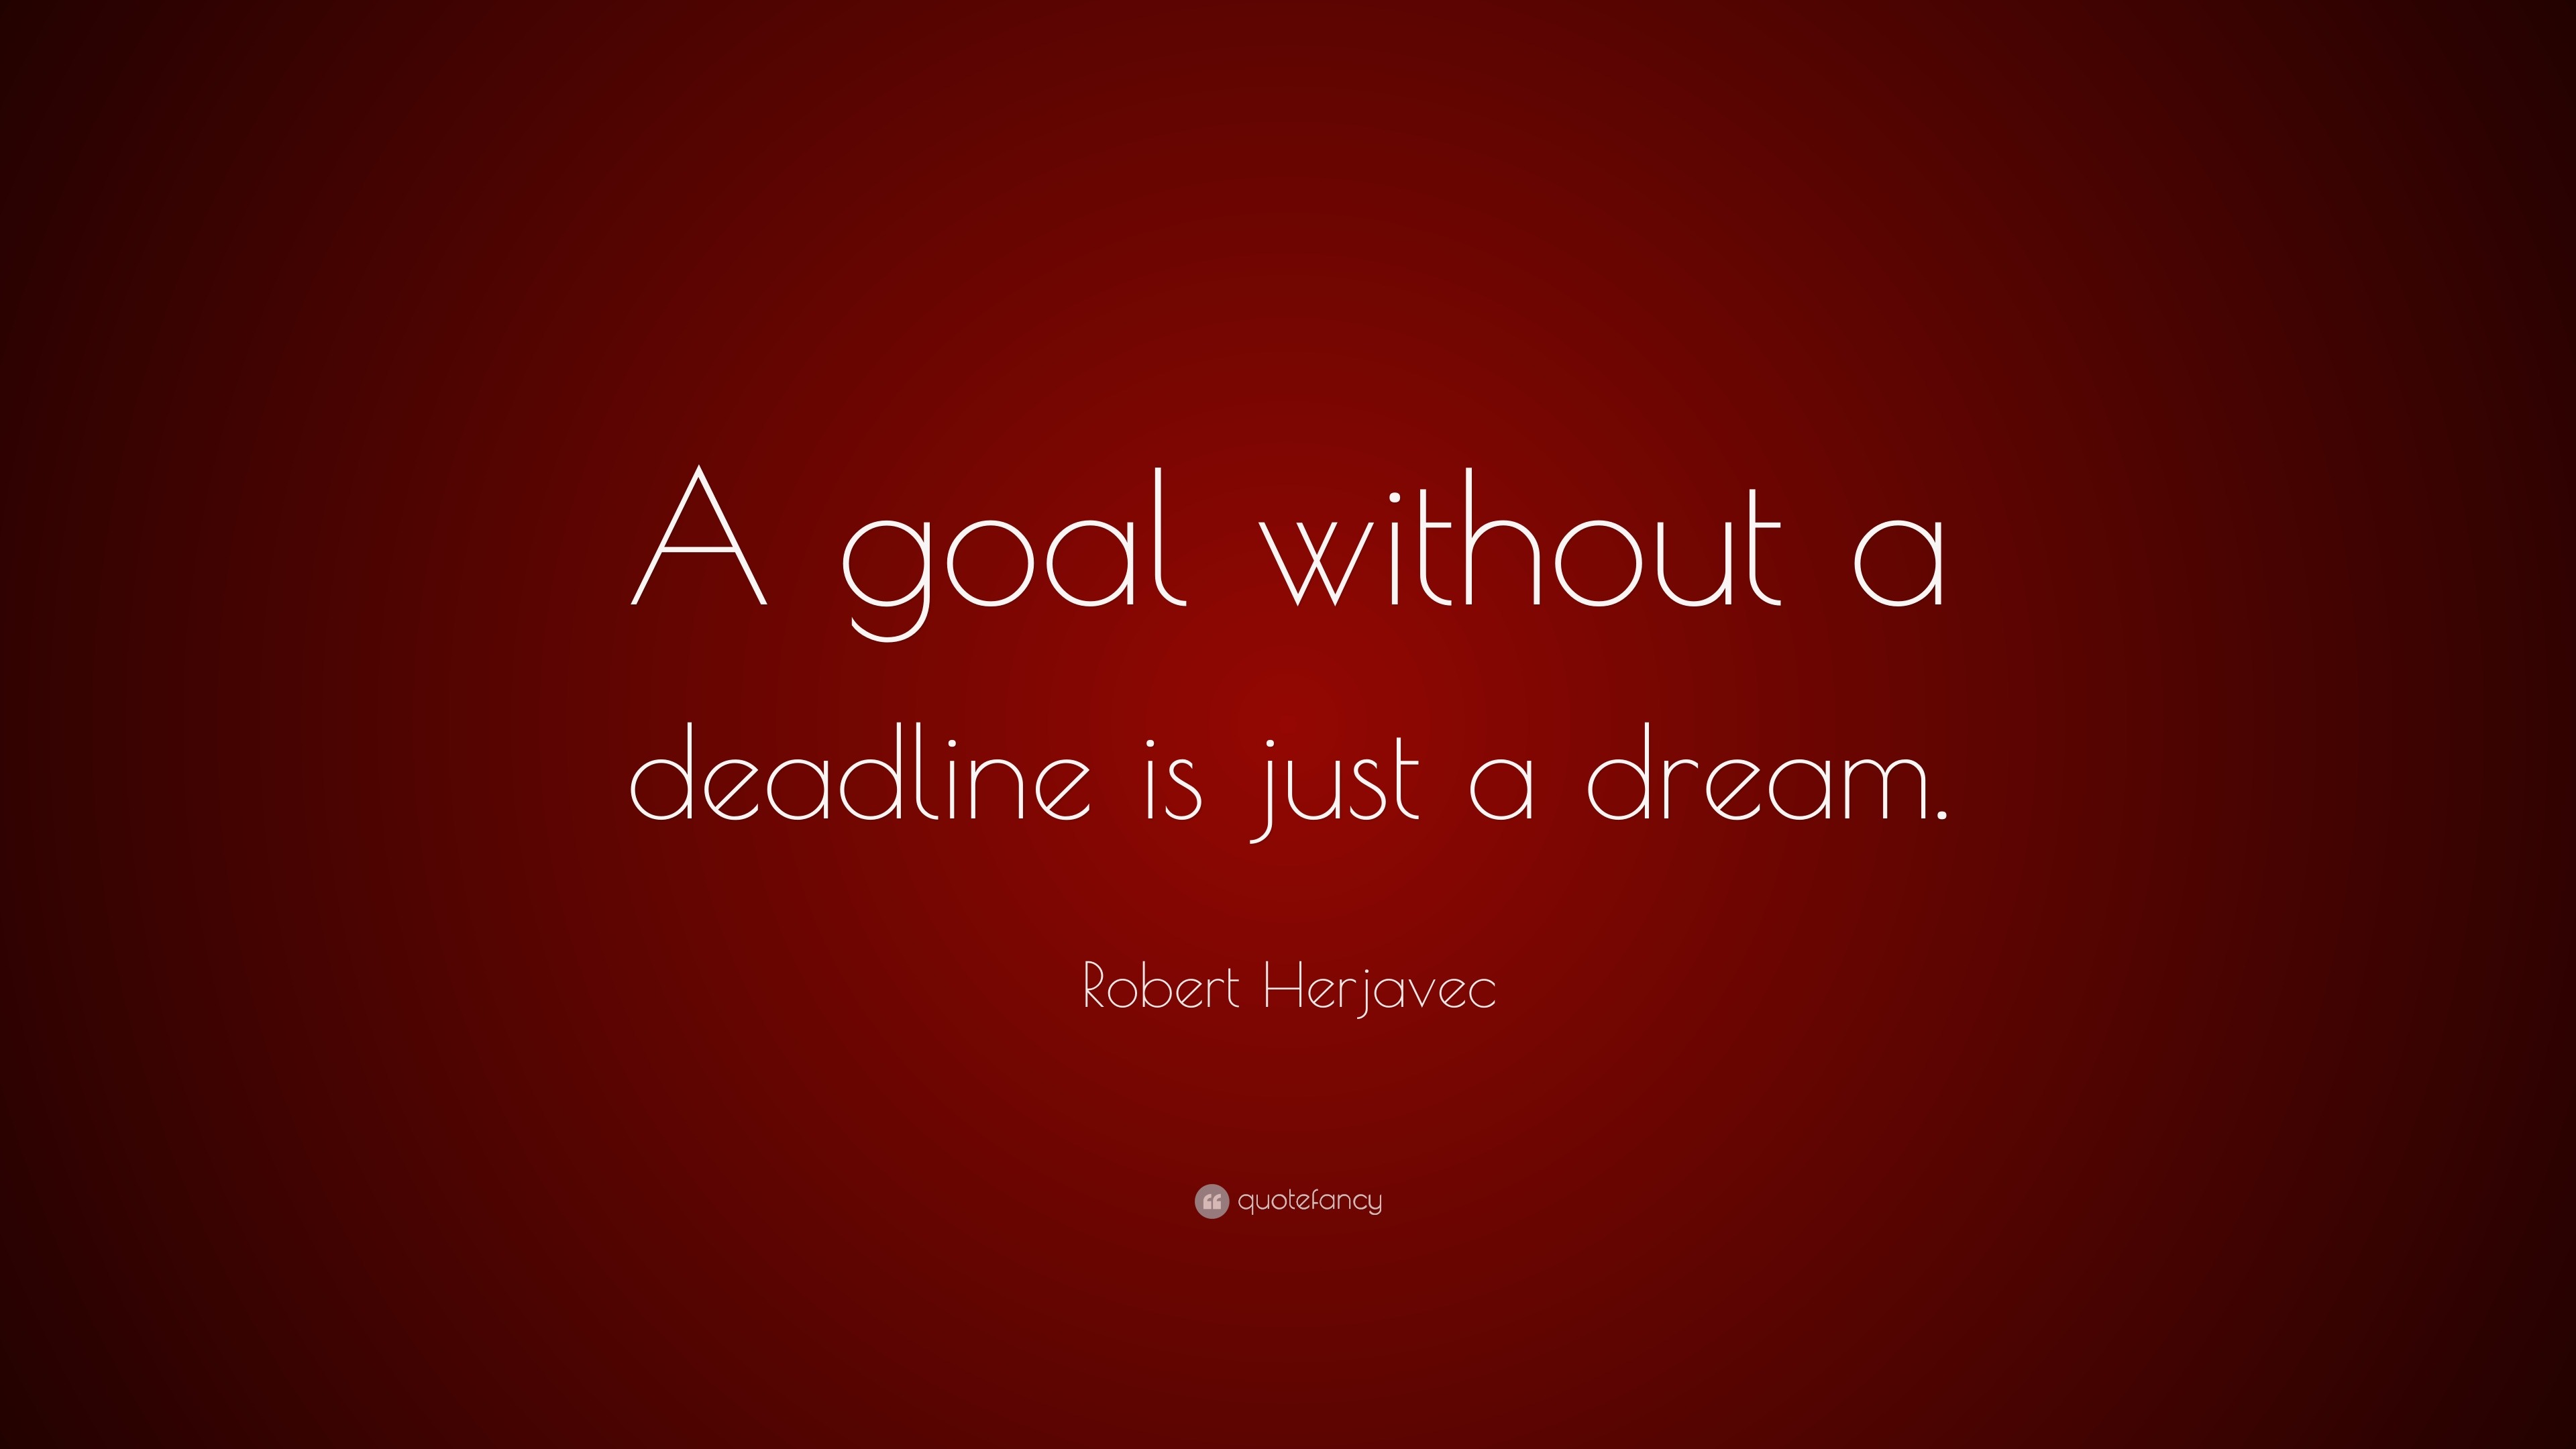 Robert Herjavec Quote: “A goal without a deadline is just a dream ...